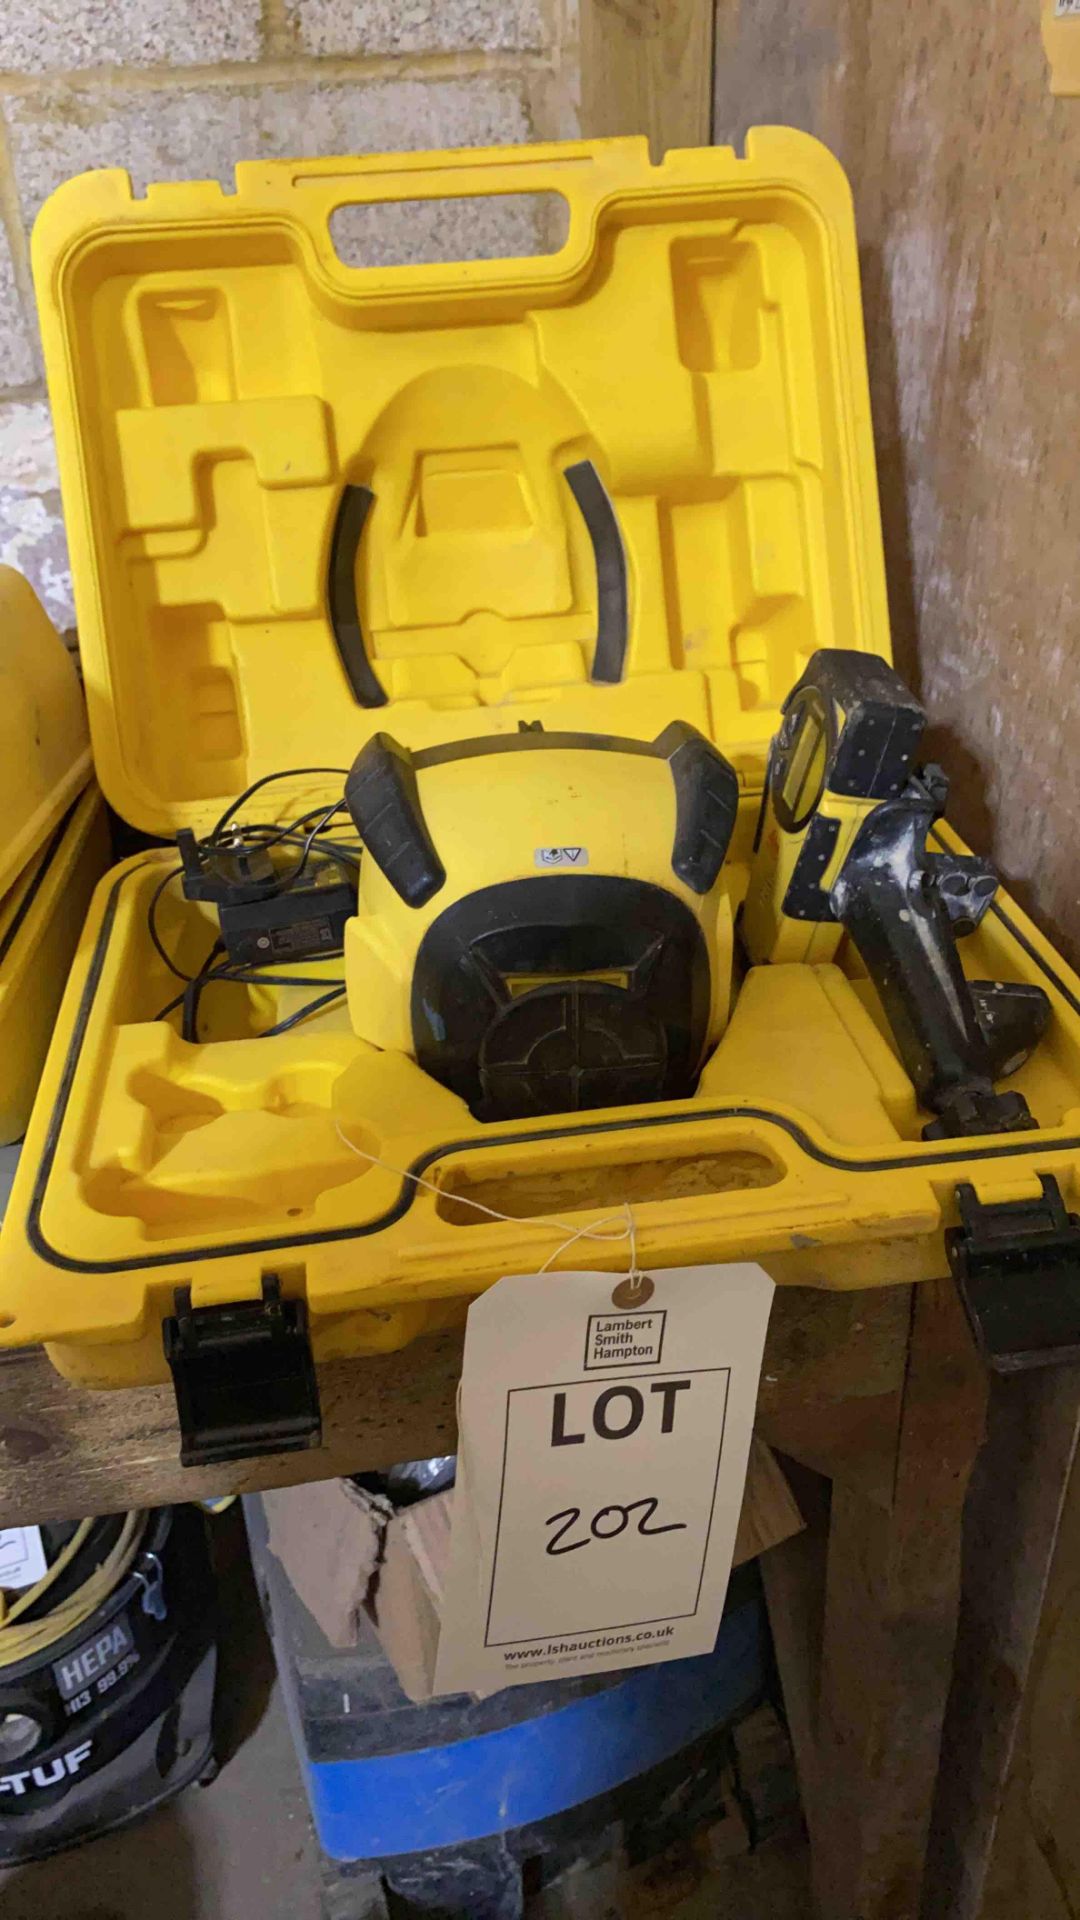 Leica Rugby 50 laser level complete with Leica handheld control